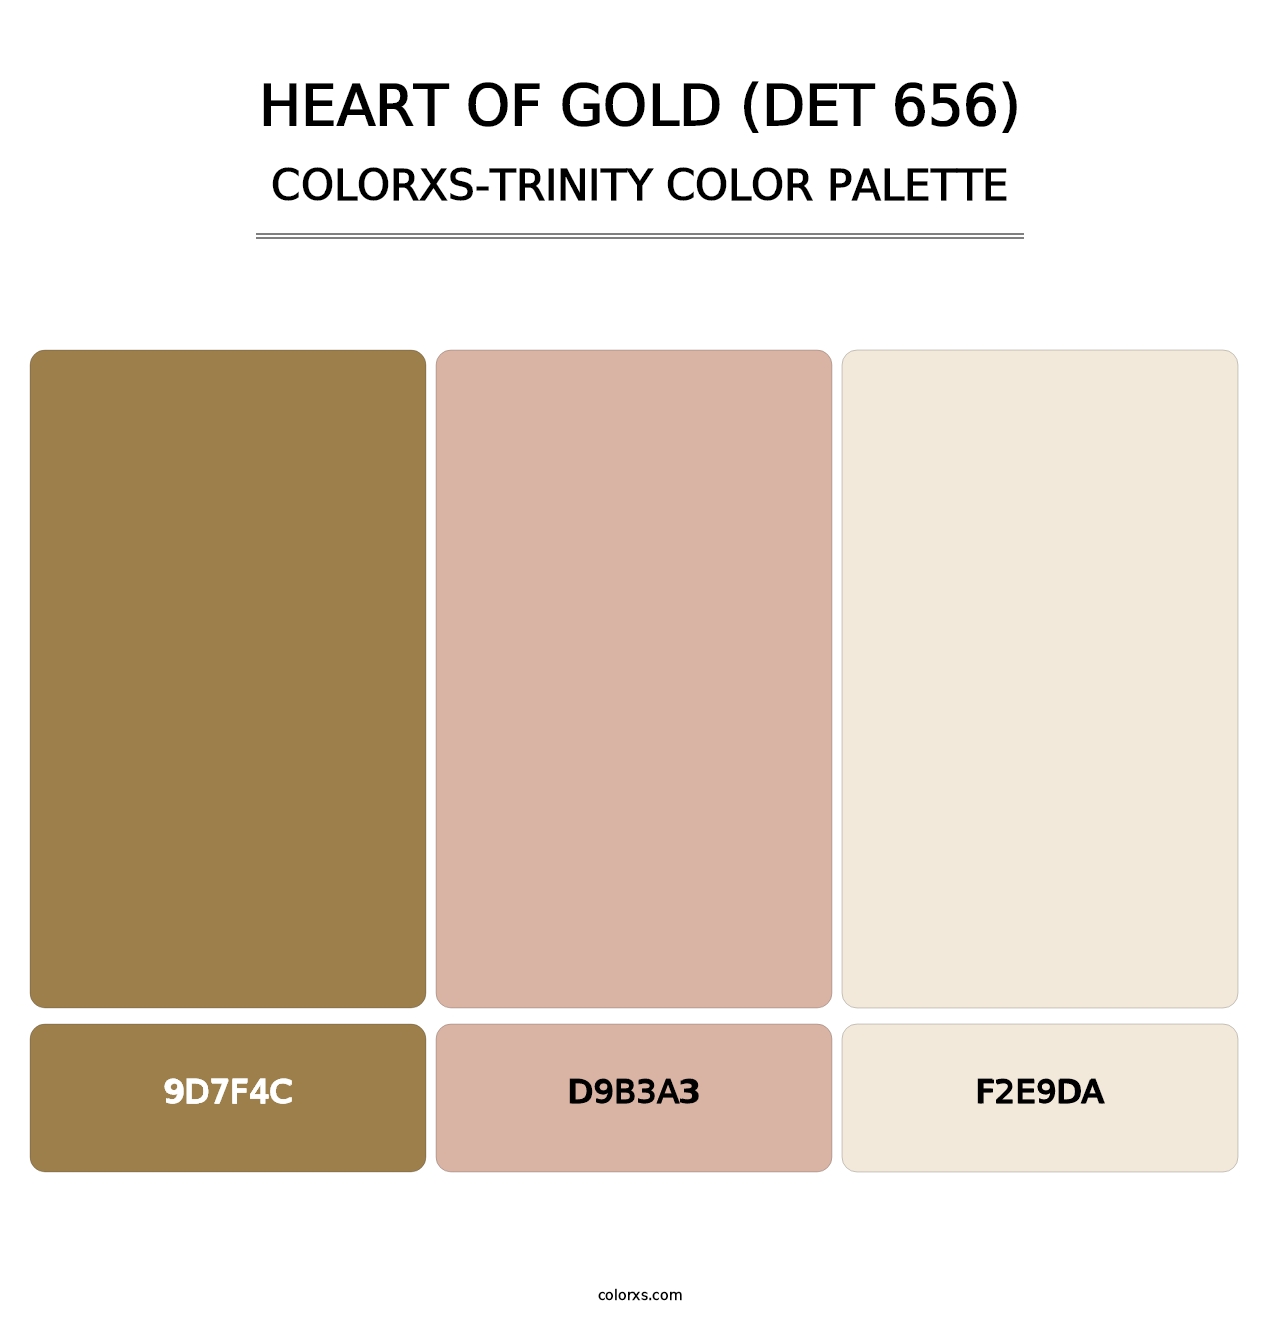 Heart of Gold (DET 656) - Colorxs Trinity Palette